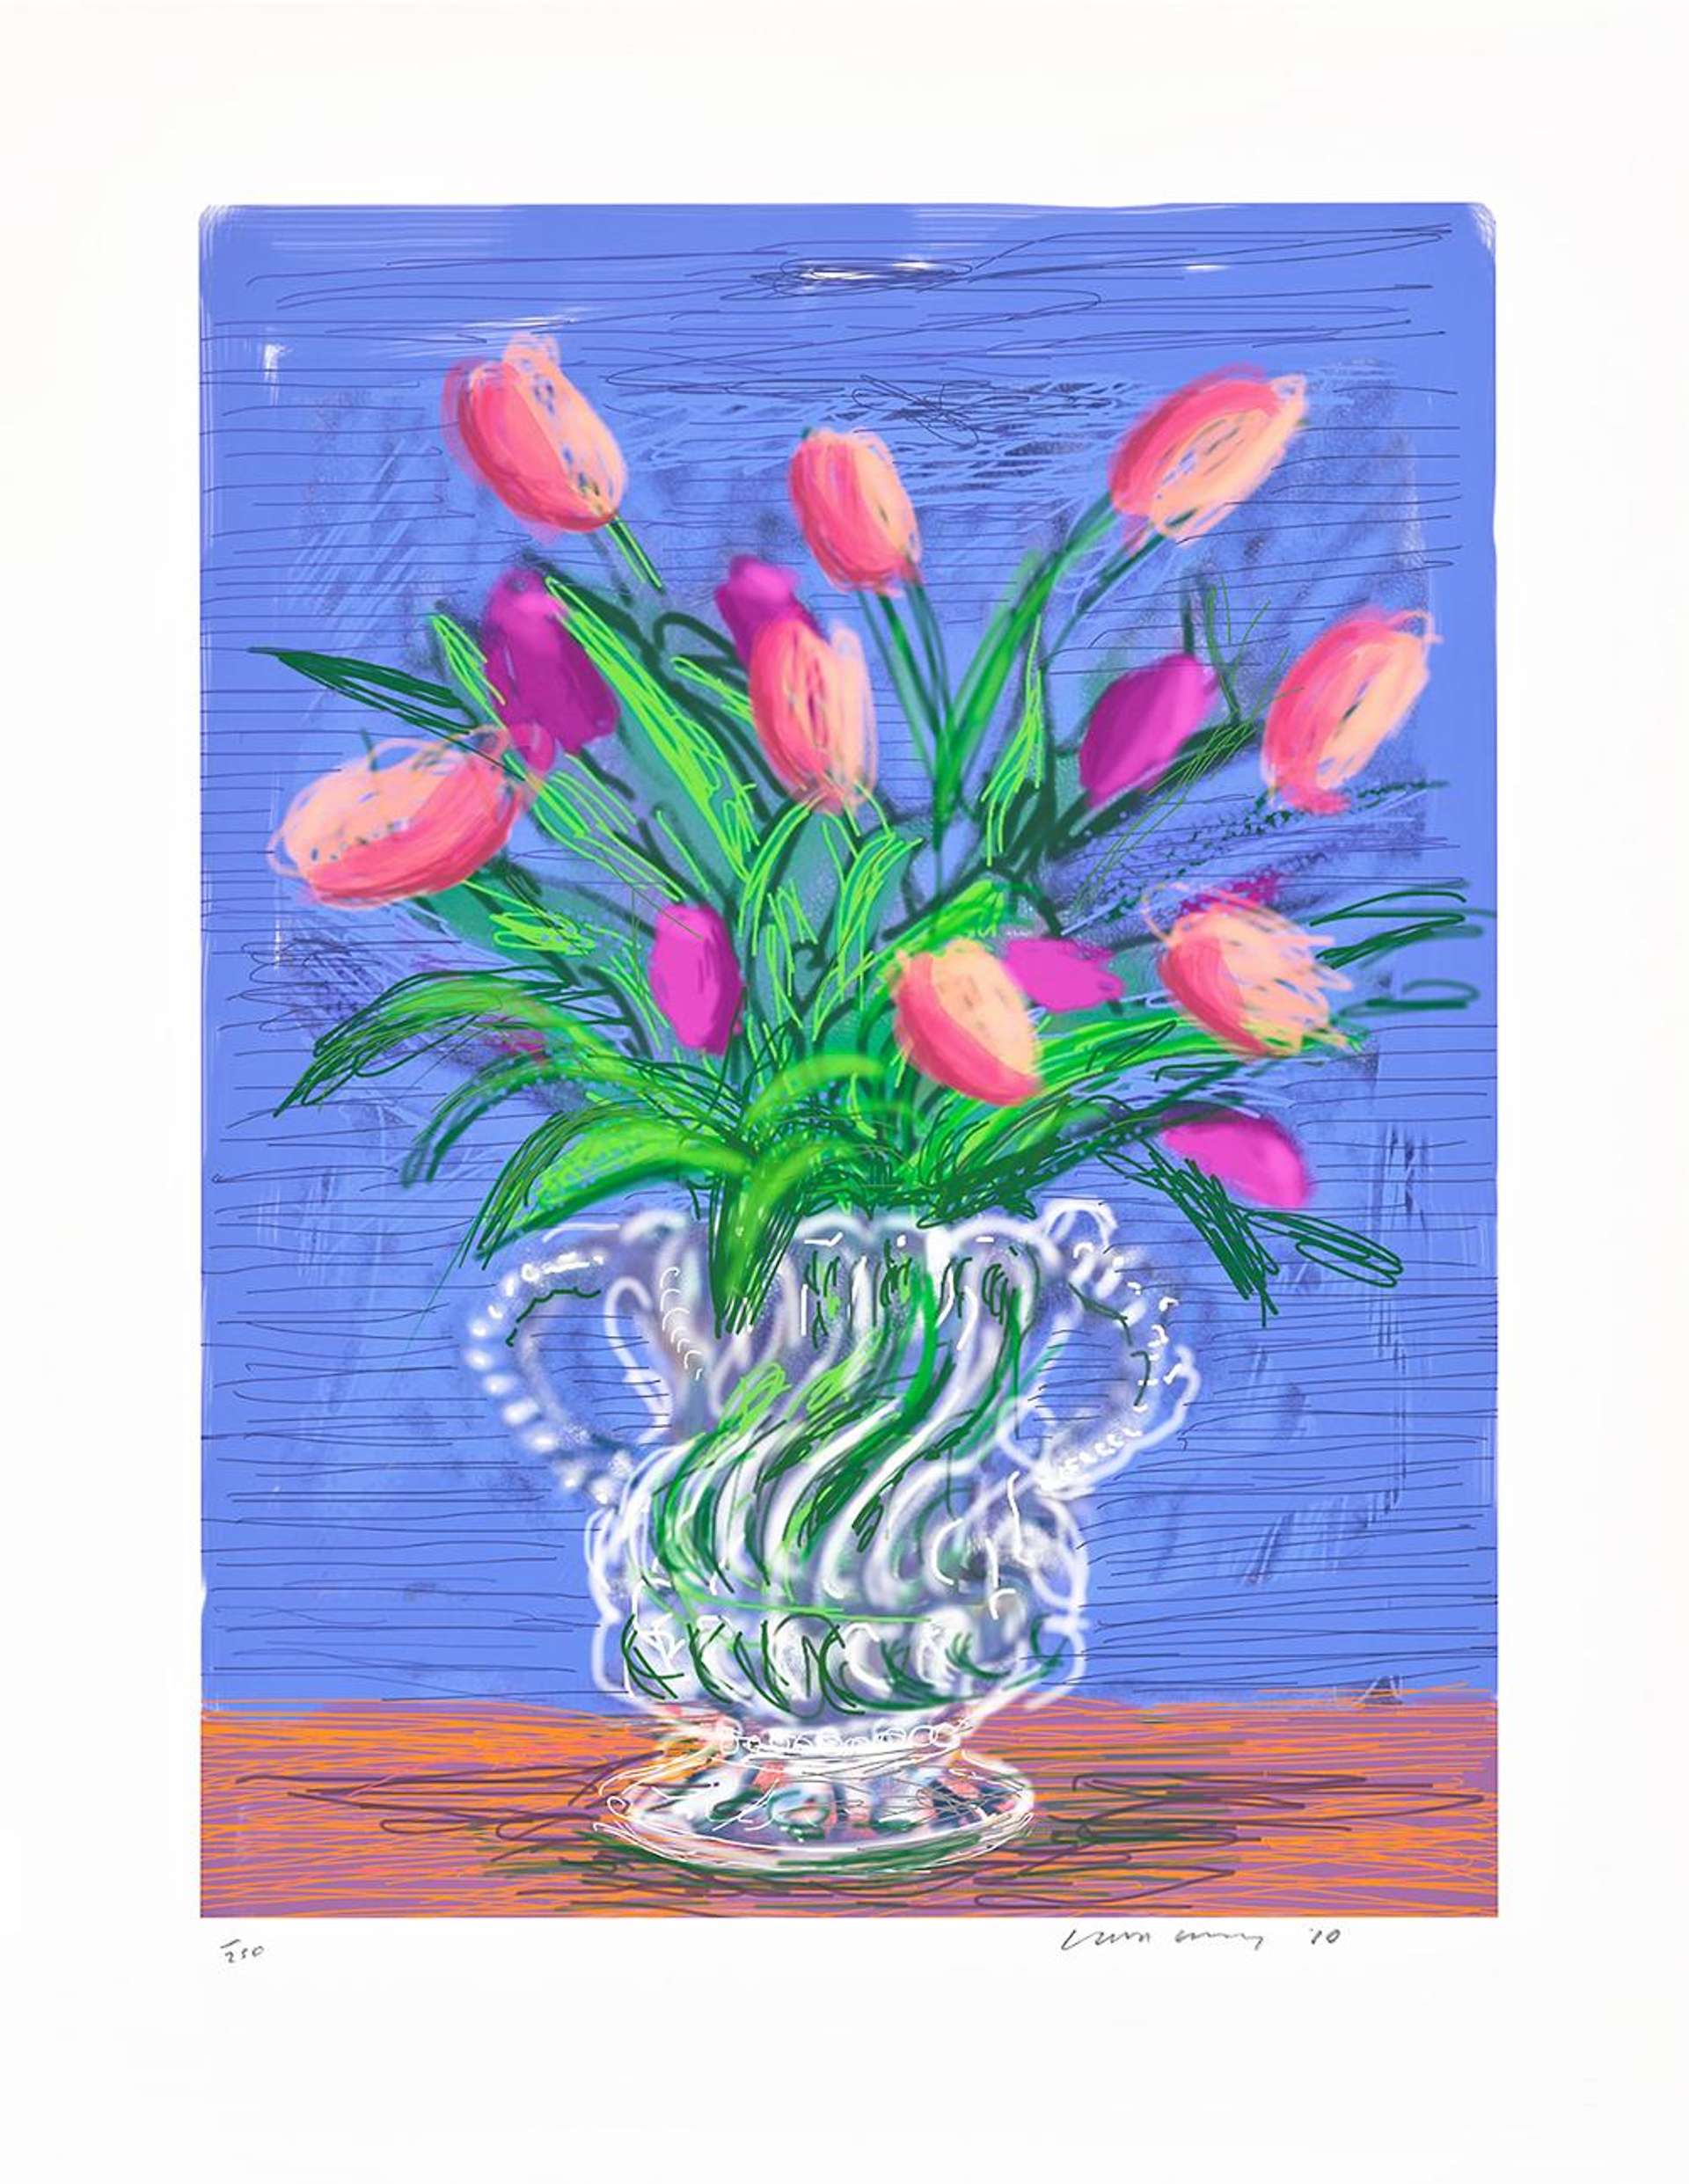 An iPad drawing by David Hockney depicting a vase of pink flowers set against a blue background.